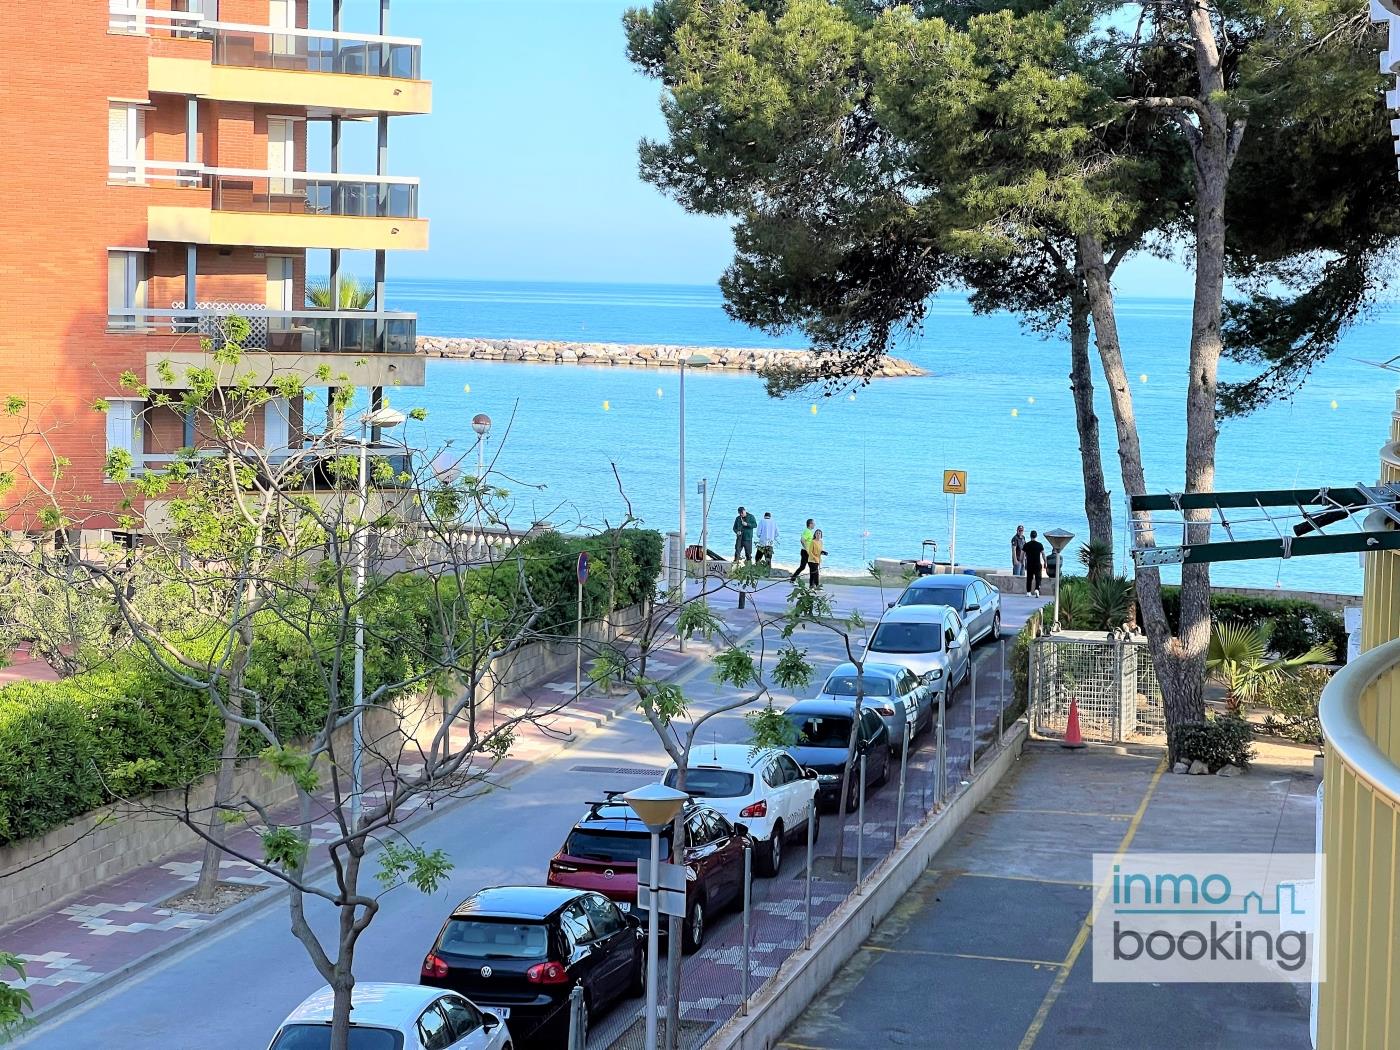 InmoBooking Internacional, first line and air-conditioned in cambrils